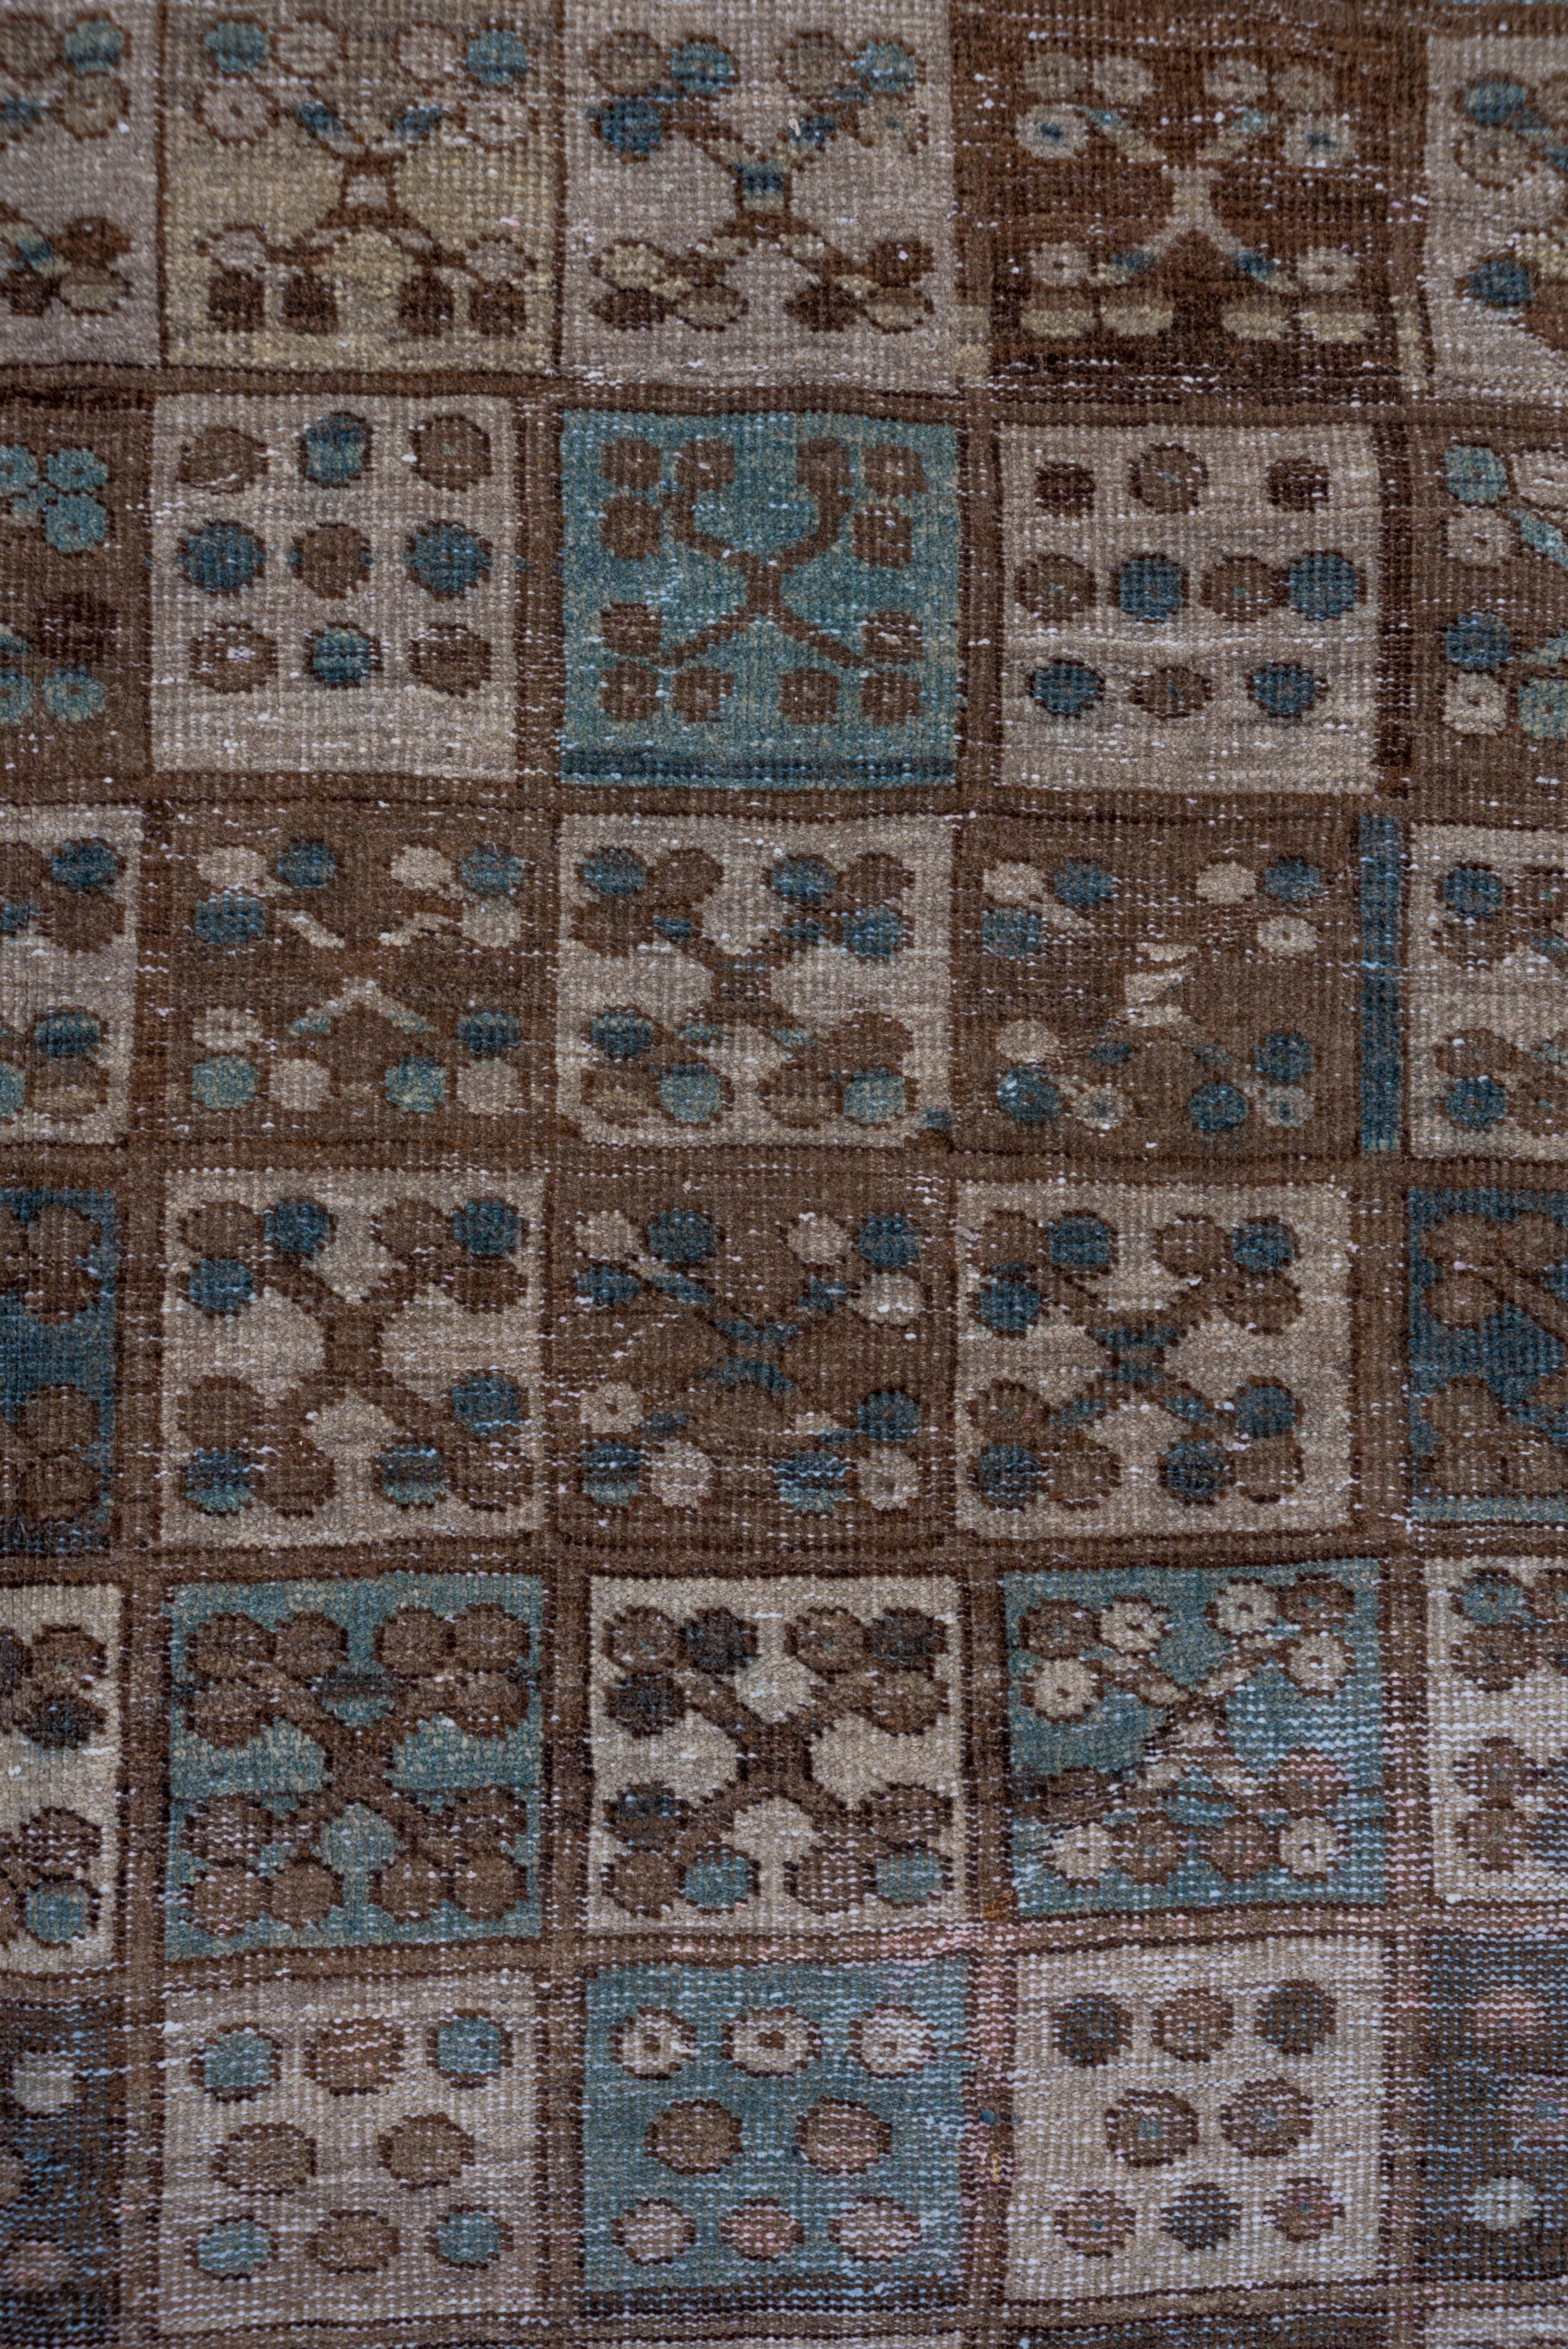 The field is completely covered by a six column square pattern with four trefoil flowers in each panel. Turkmen-style hooked lozenge-in-square border. Browns and beiges predominate with a few patches of light blue.